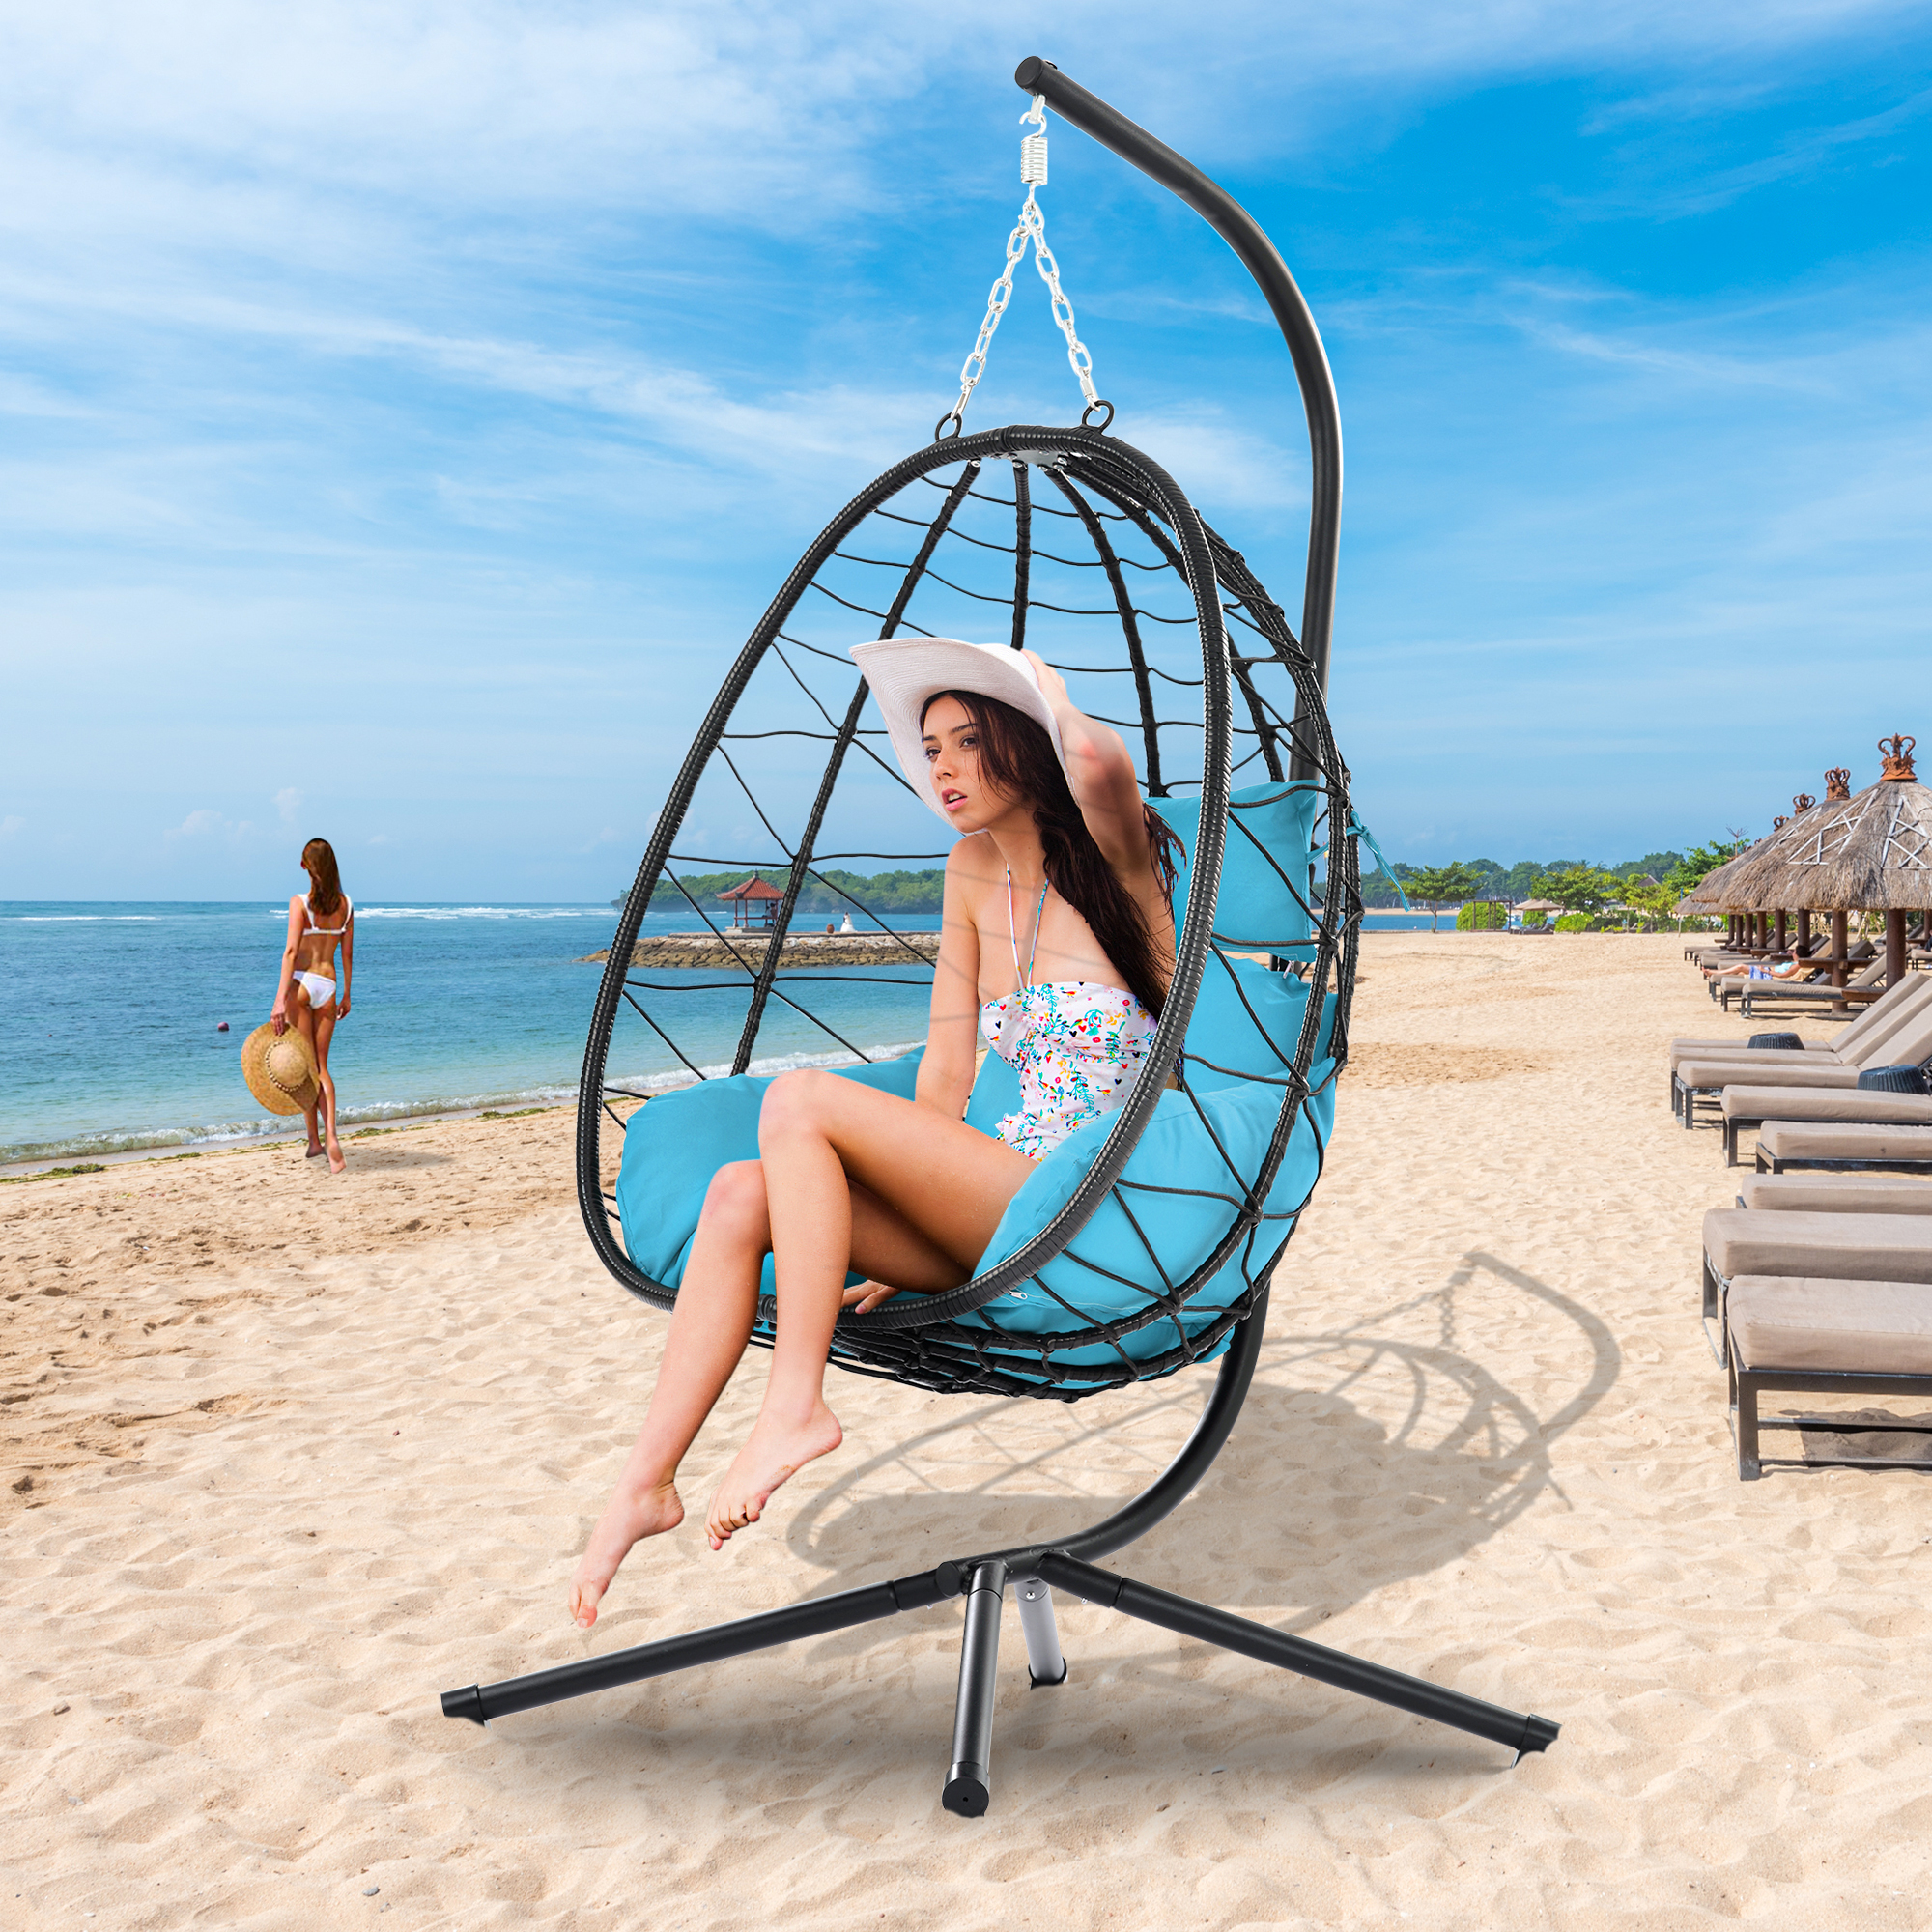 Egg Chair, Indoor Outdoor Patio Wicker Hanging Chair with Stand, Hanging Swing Chair w/ Cushion, Durable All-Weather UV Rattan Lounge Chair for Bedroom, Patio, Deck, Yard, Garden, 350lbs, Blue, SS1968 - image 2 of 9